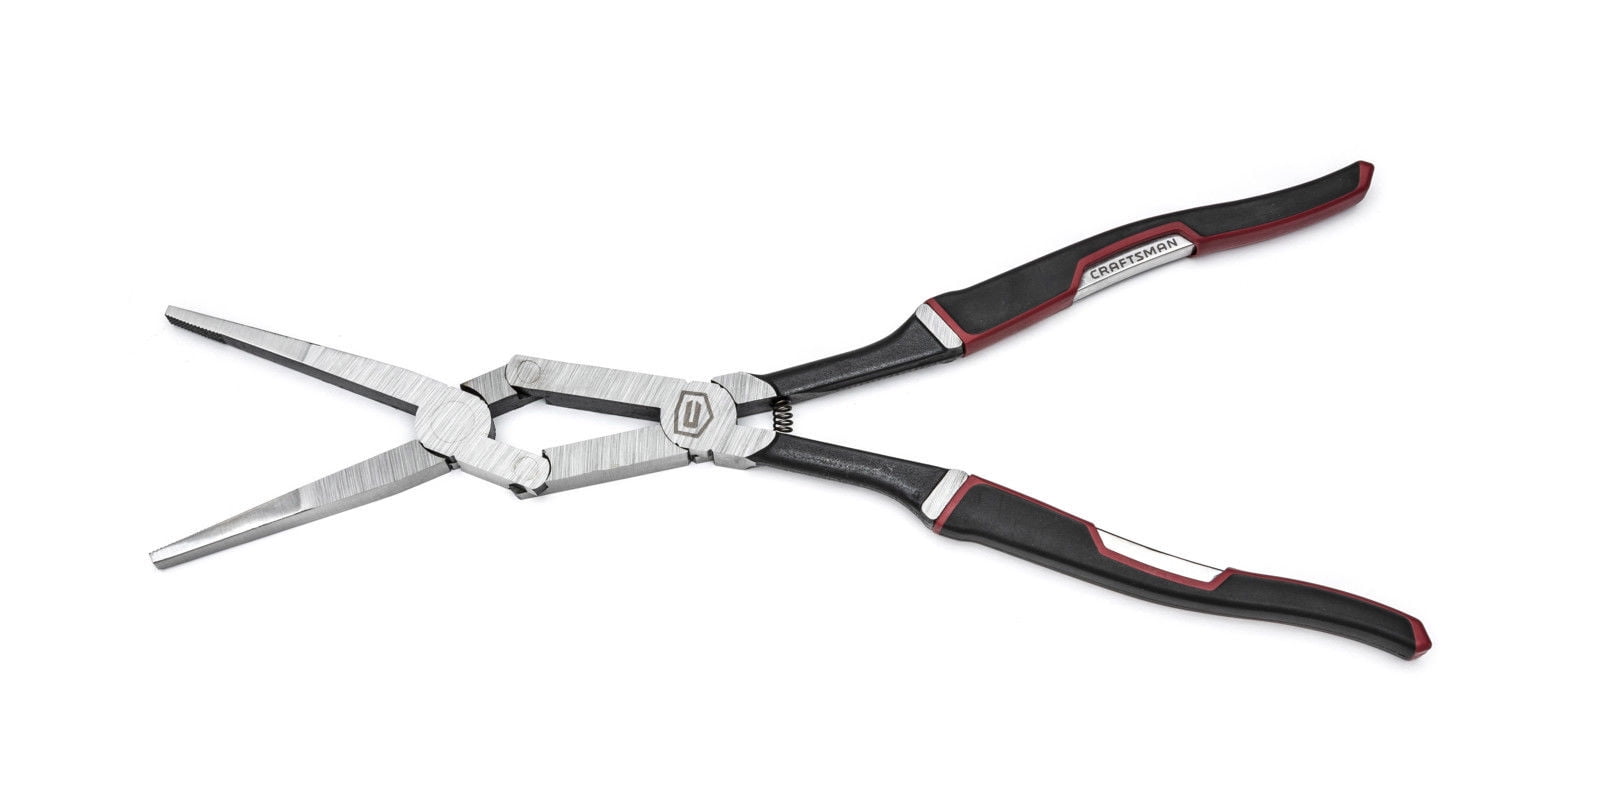  JEWEL TOOL 30° Bent Nose Pliers, Slim Body, Polished  Stainless Steel, Double Spring Action, Vinyl-Wrapped Comfort Handles